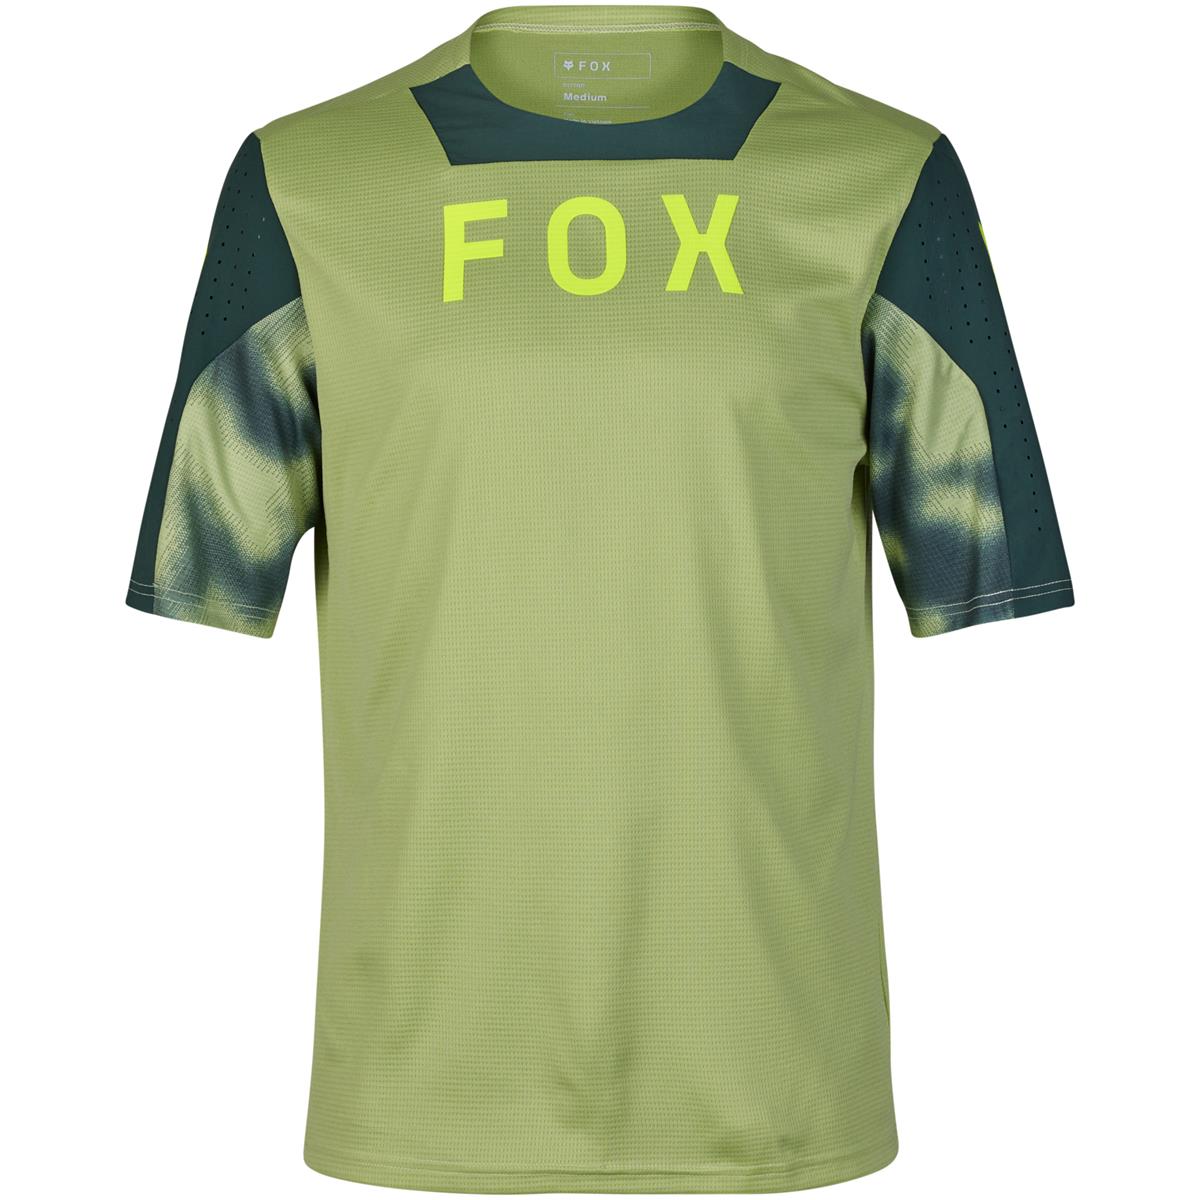 Fox MTB Jersey Short Sleeve Defend Taunt - Pale Green